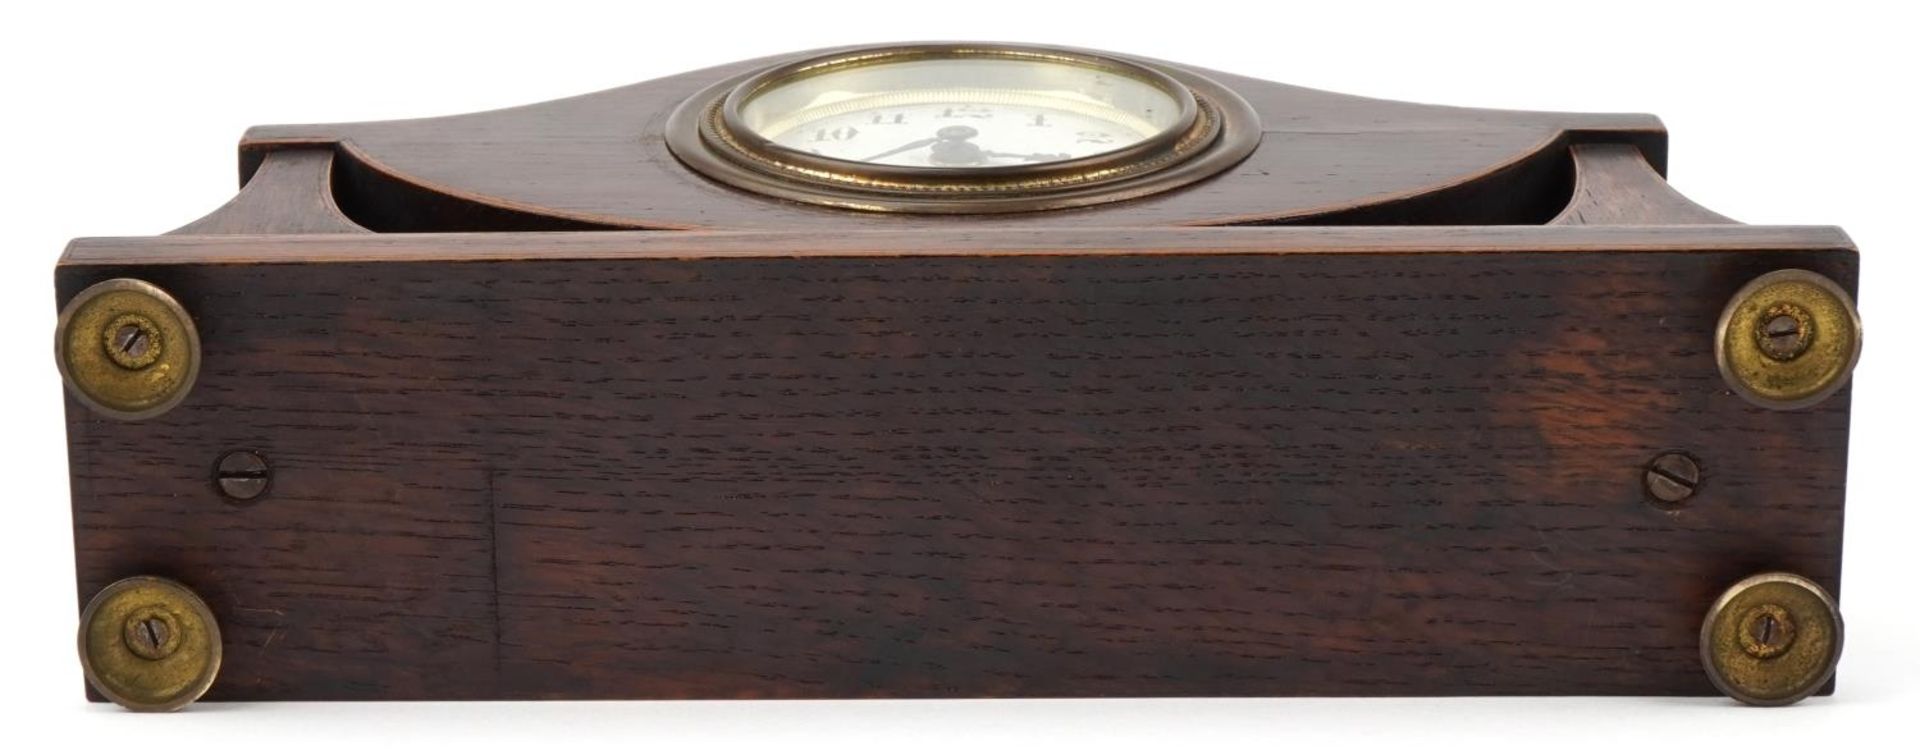 Edwardian inlaid rosewood mantle clock with circular dial having Arabic numerals, 28.5cm wide : - Image 4 of 4